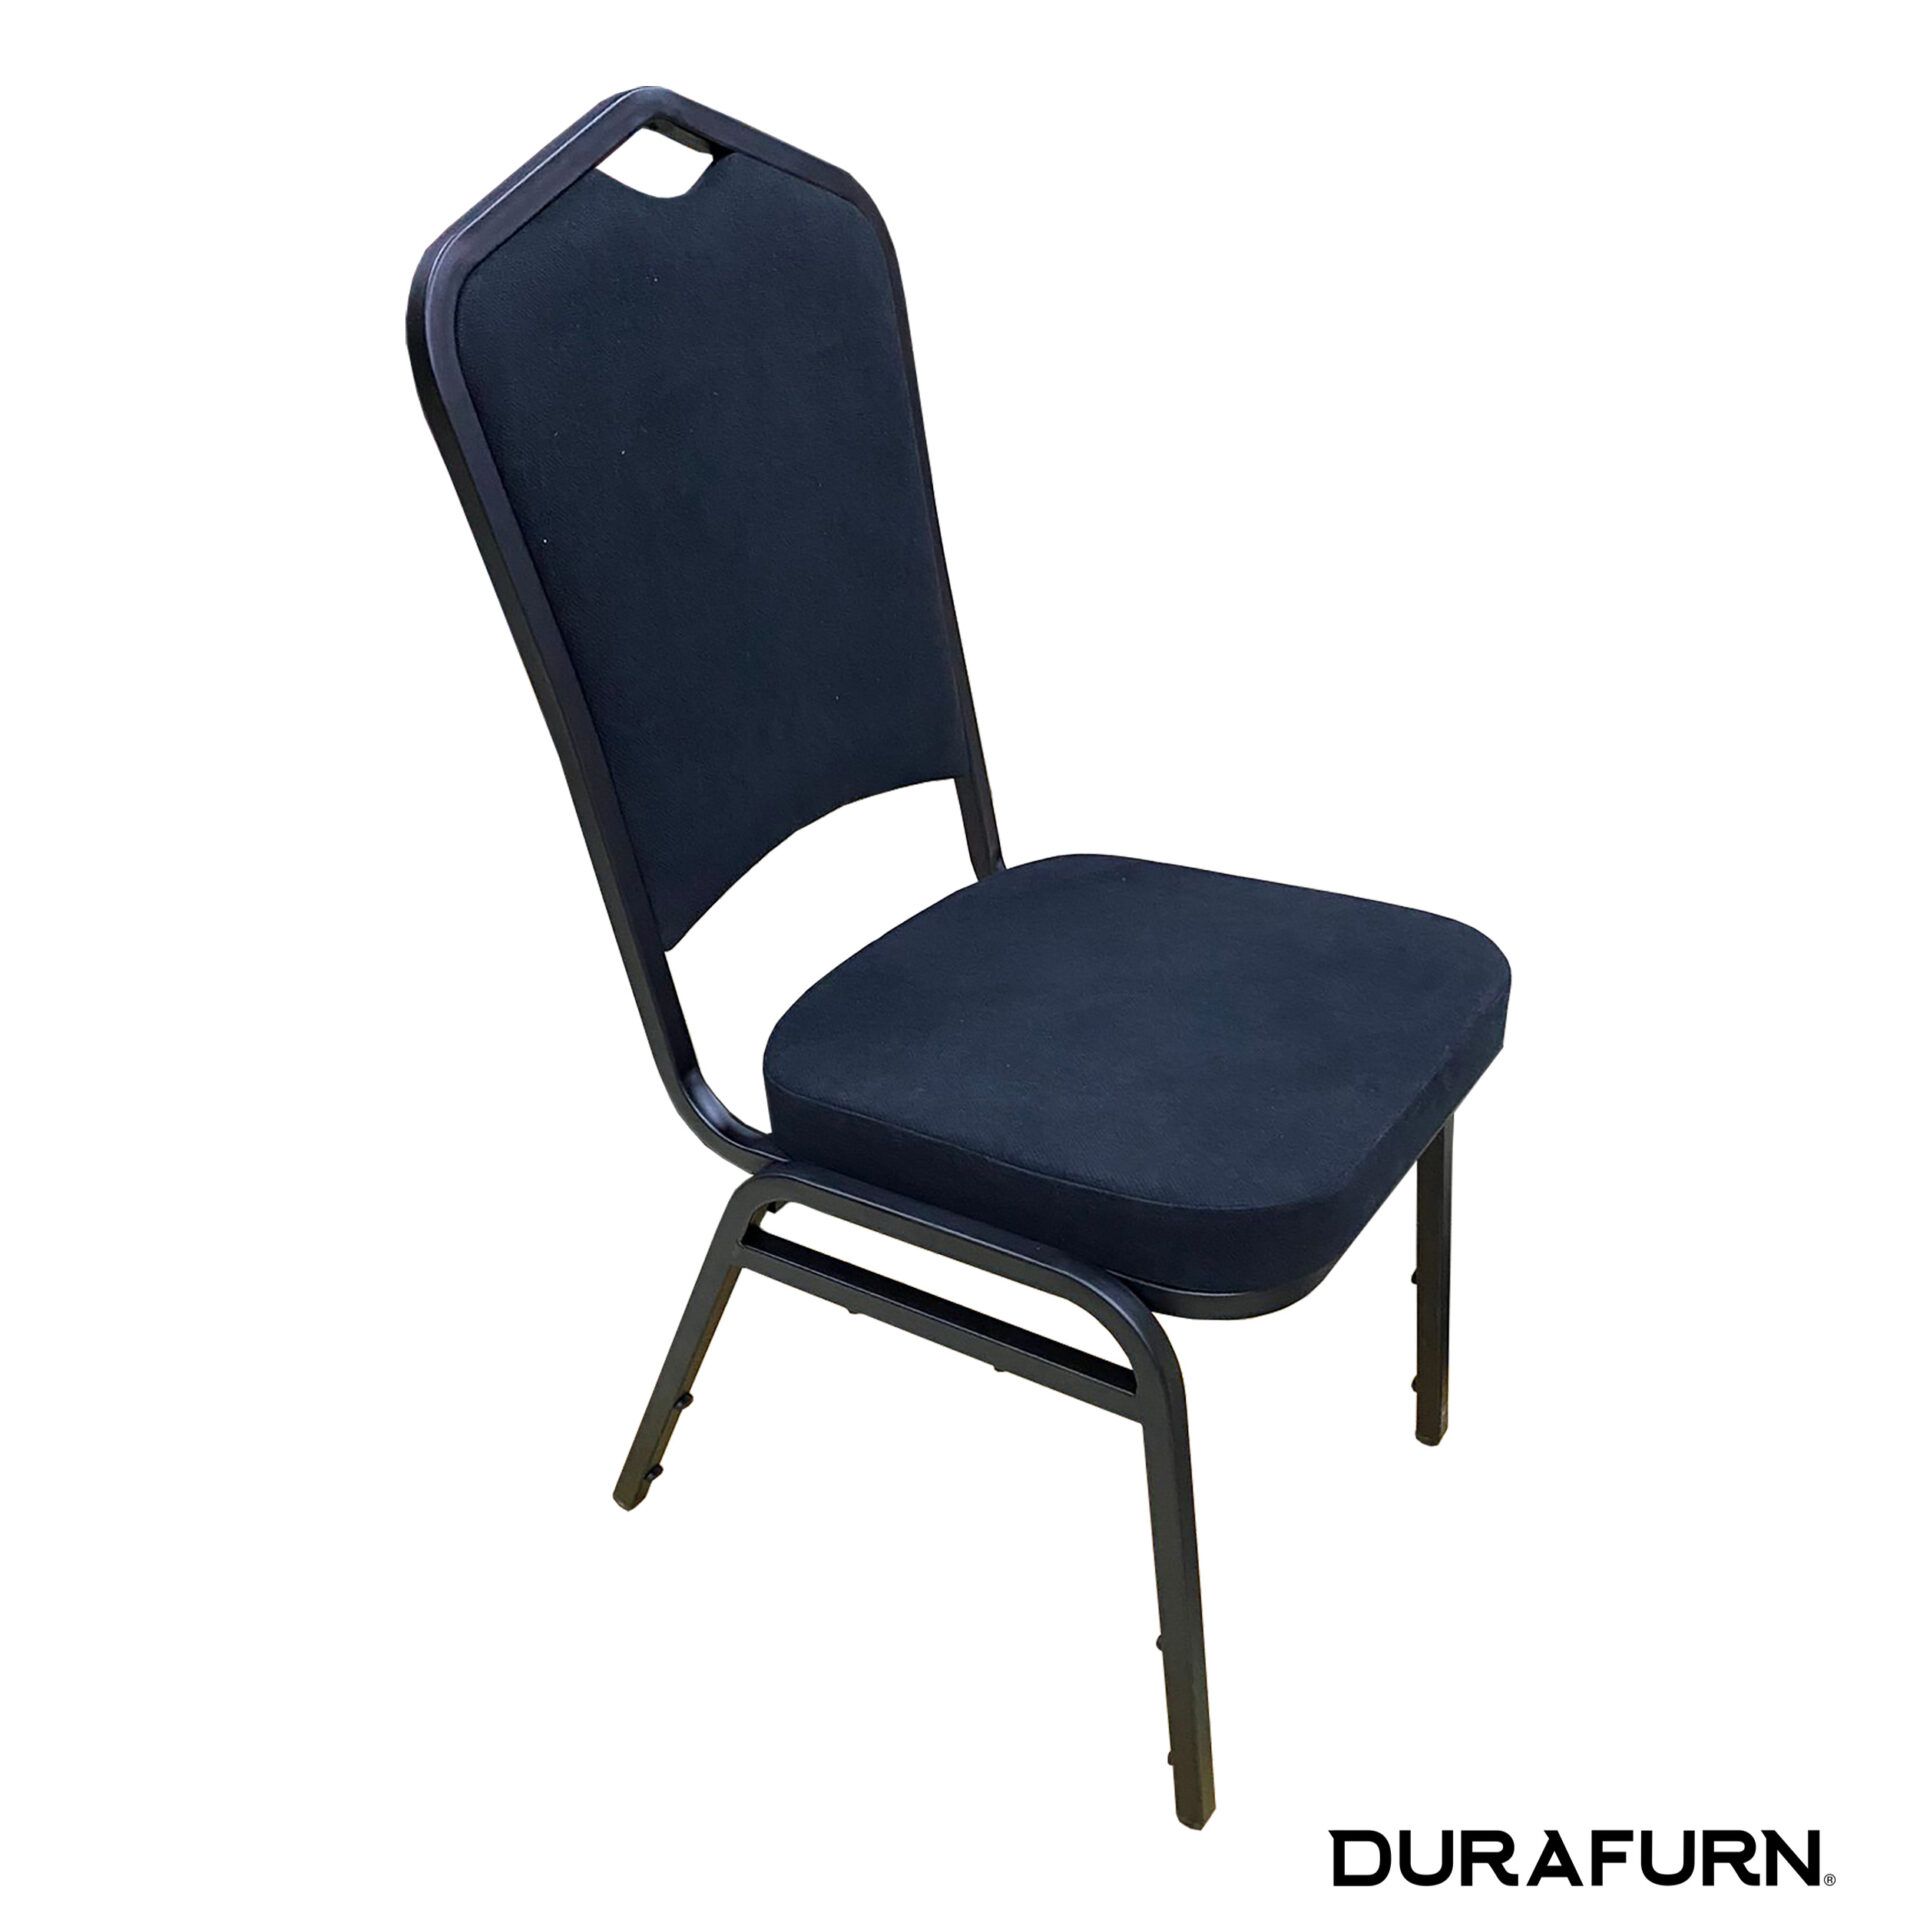 Function Chair Image 1